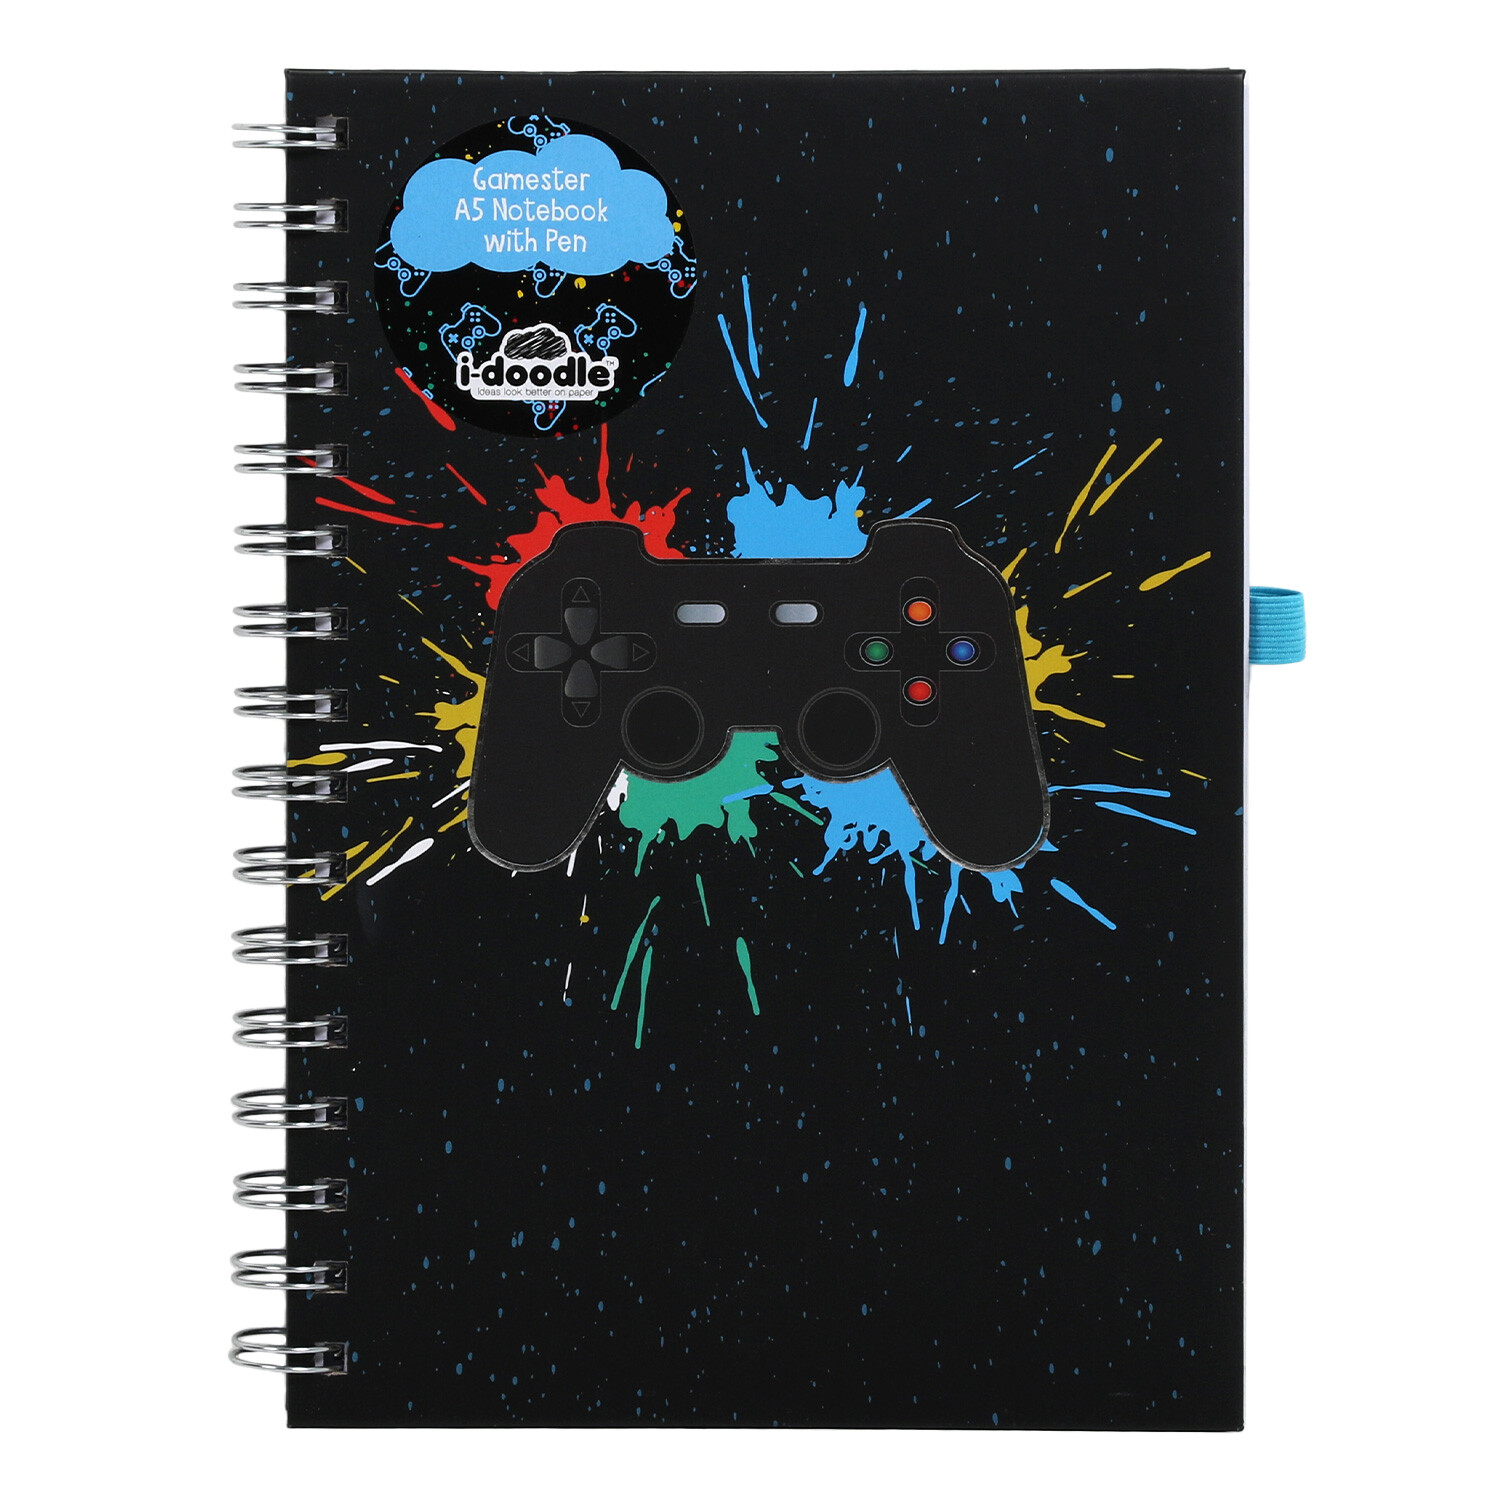 Idoodle Gamester A5 Notebook with Pen - Black Image 3